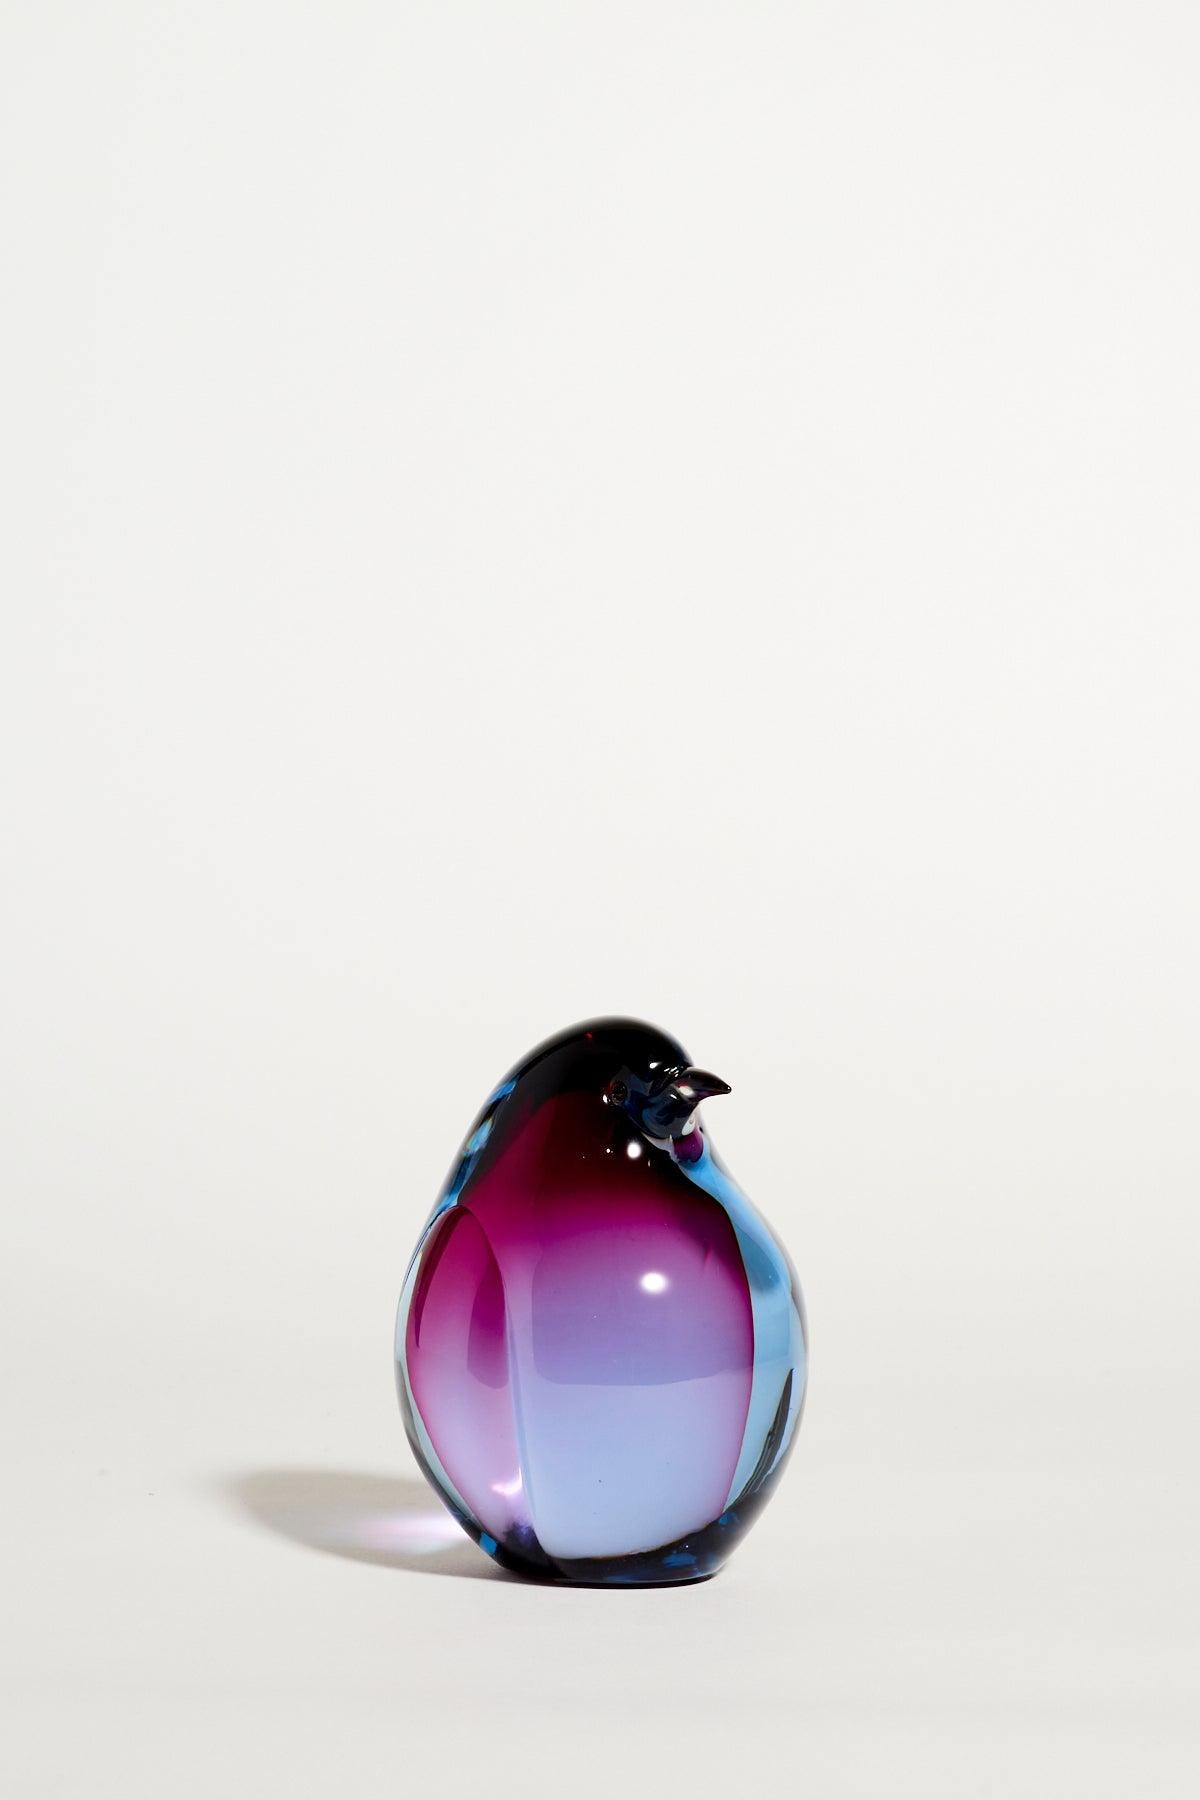 Beautiful Livio Seguso glass penguin in shades of lilac, magenta, aubergine and blue, signed on base, imported from Germany.